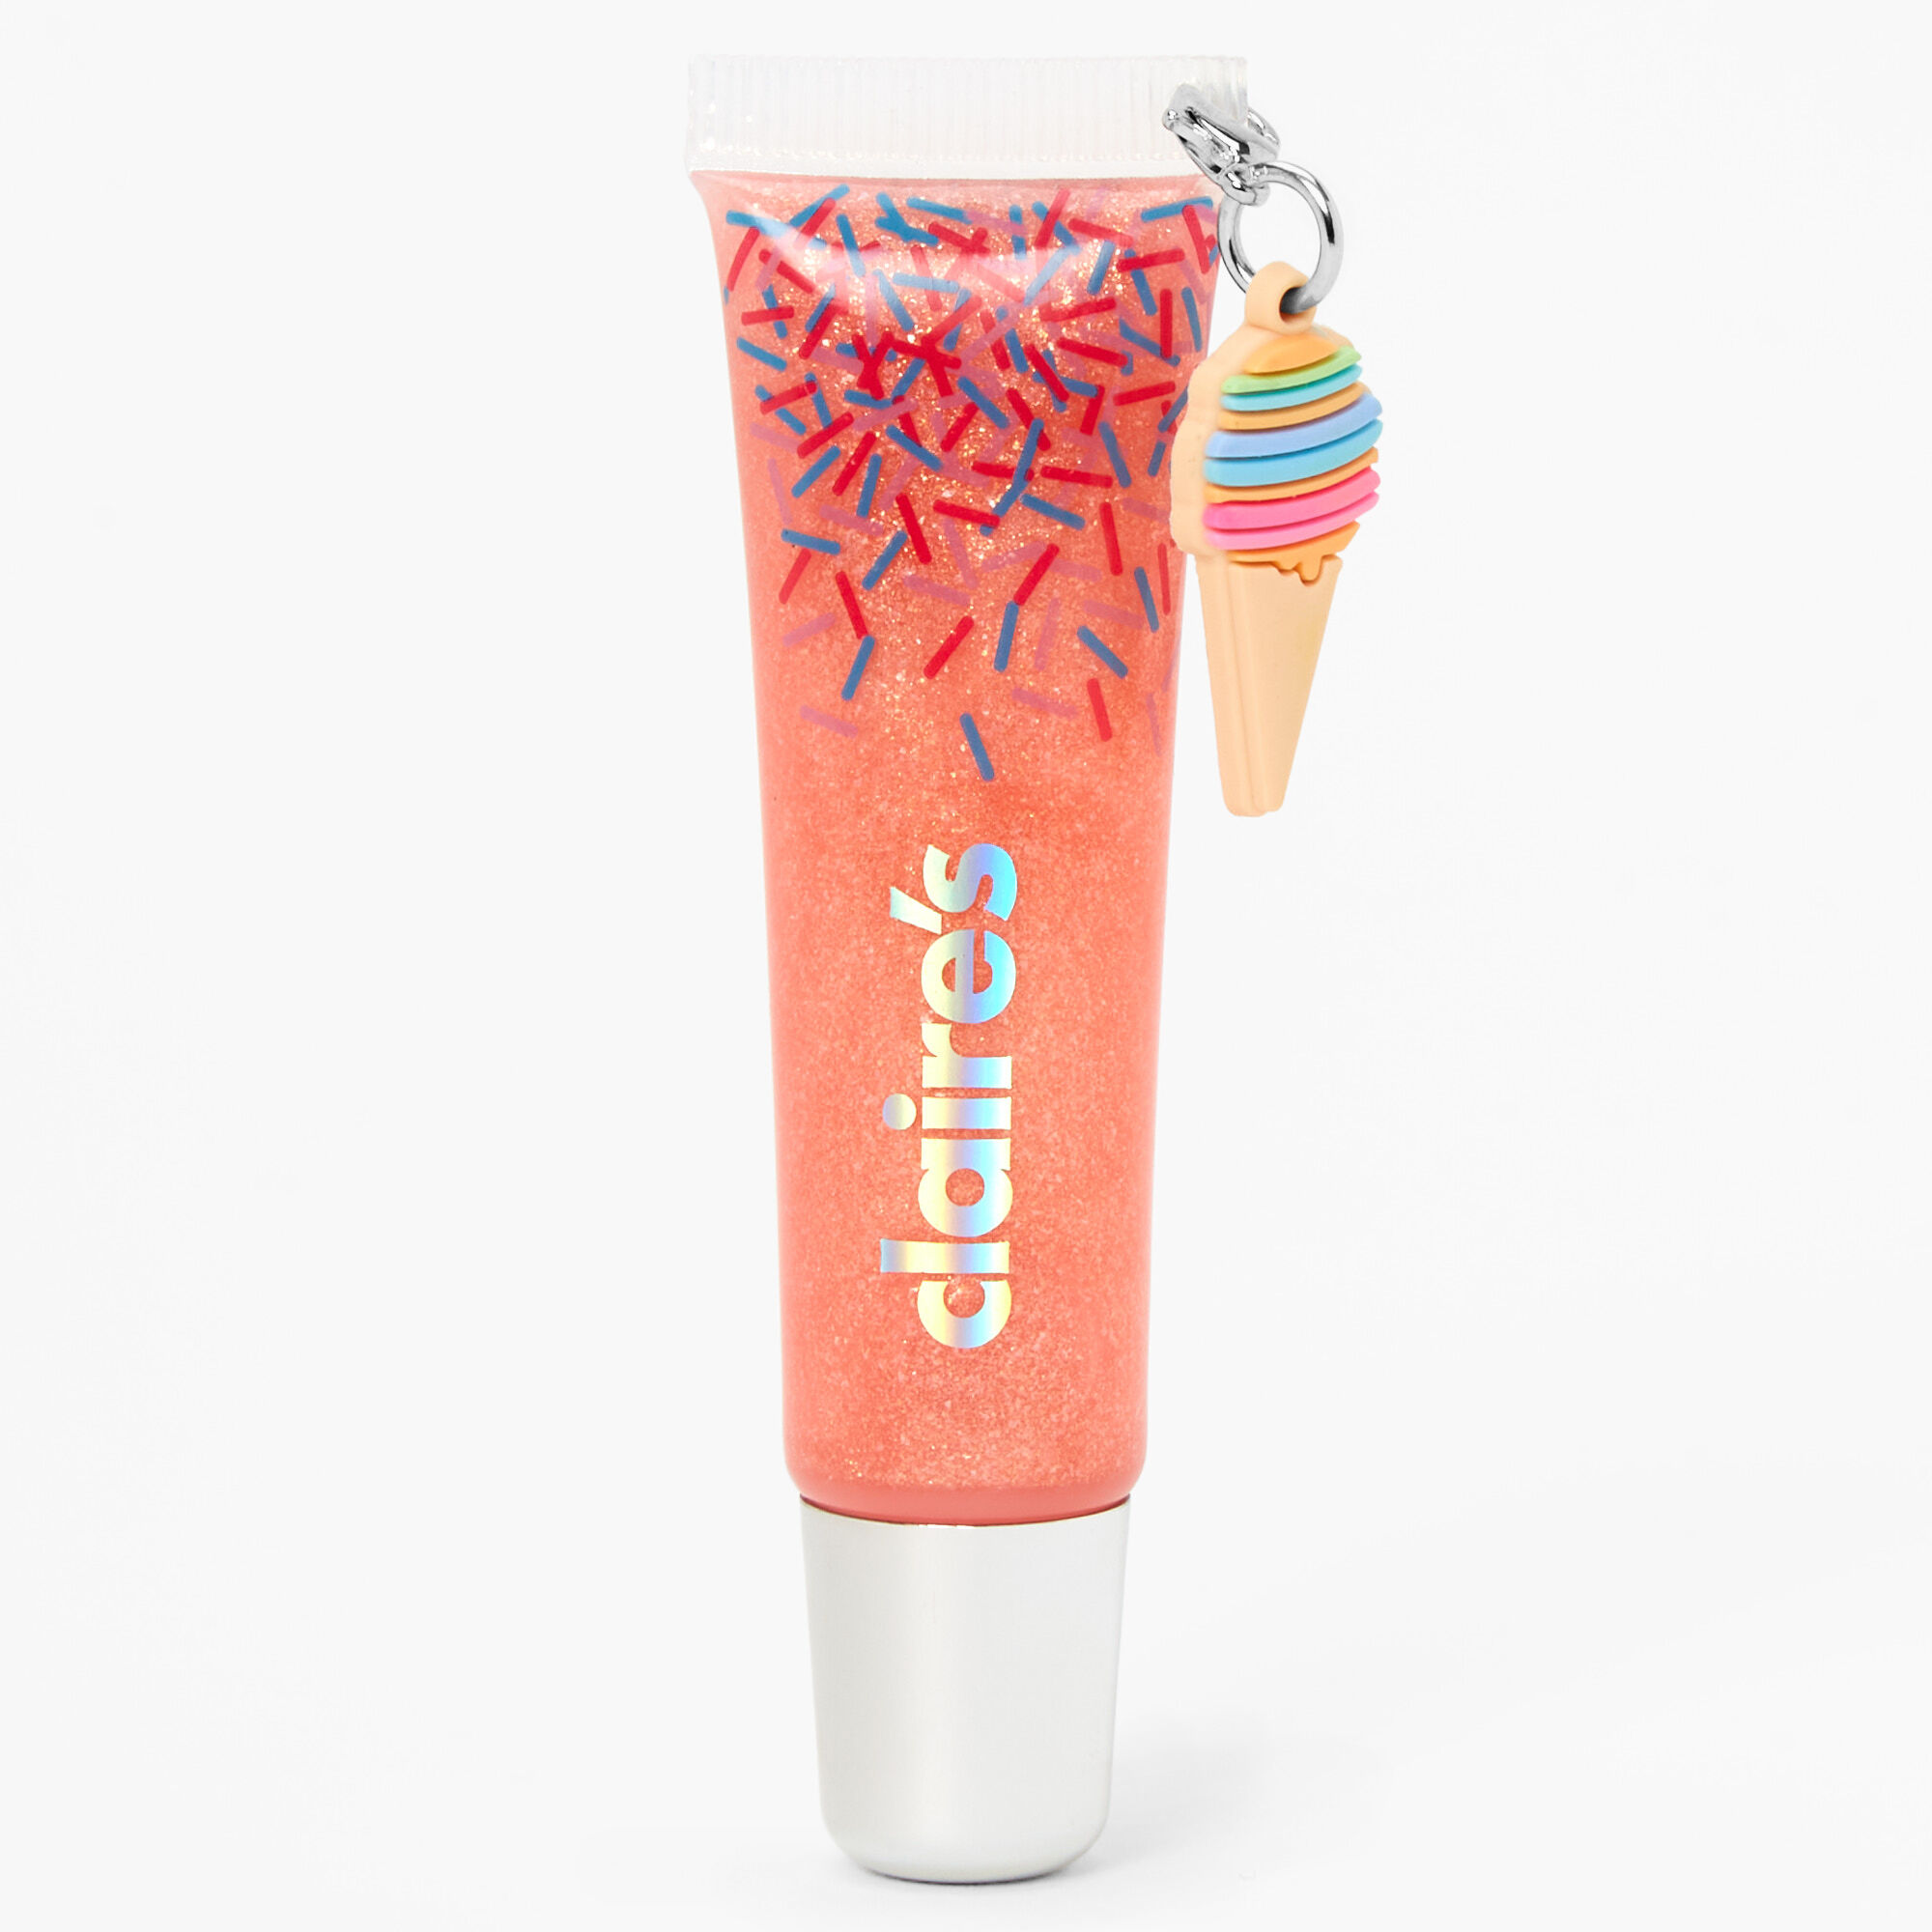 Charms® Fluffy Stuff Claire's Exclusive Flavored Lip Gloss Tube